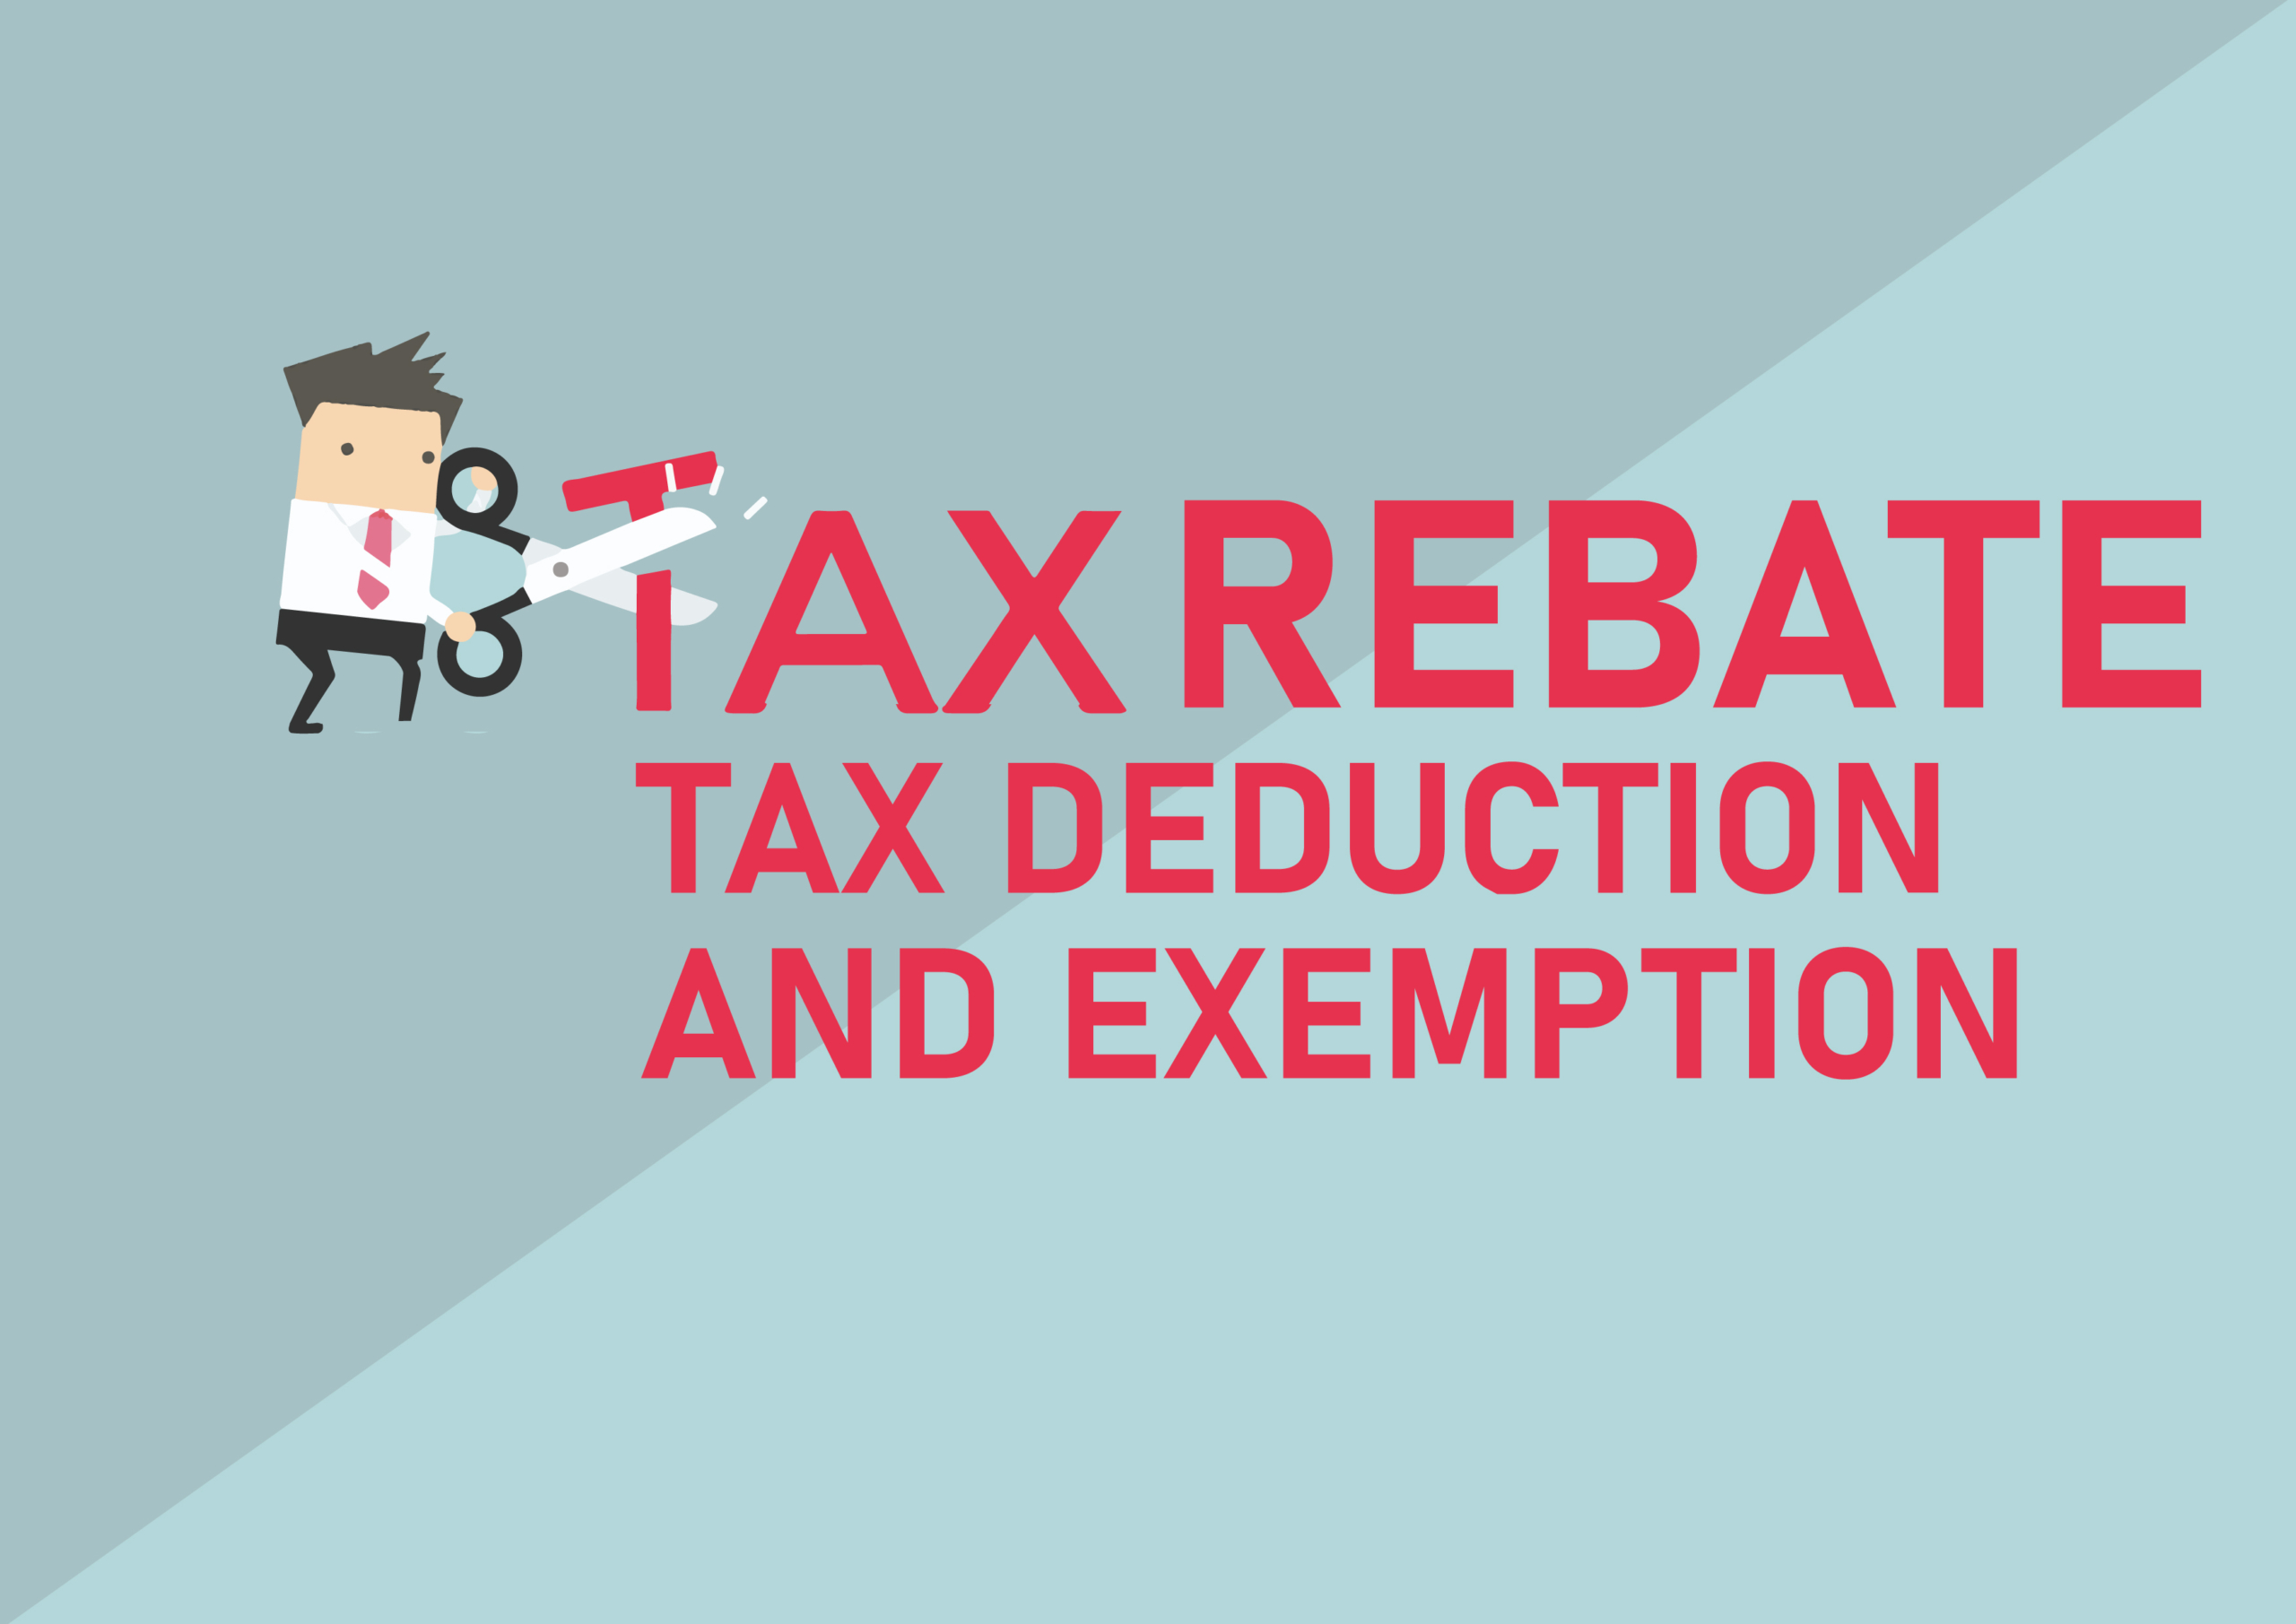 Income Tax Rebate Exemption